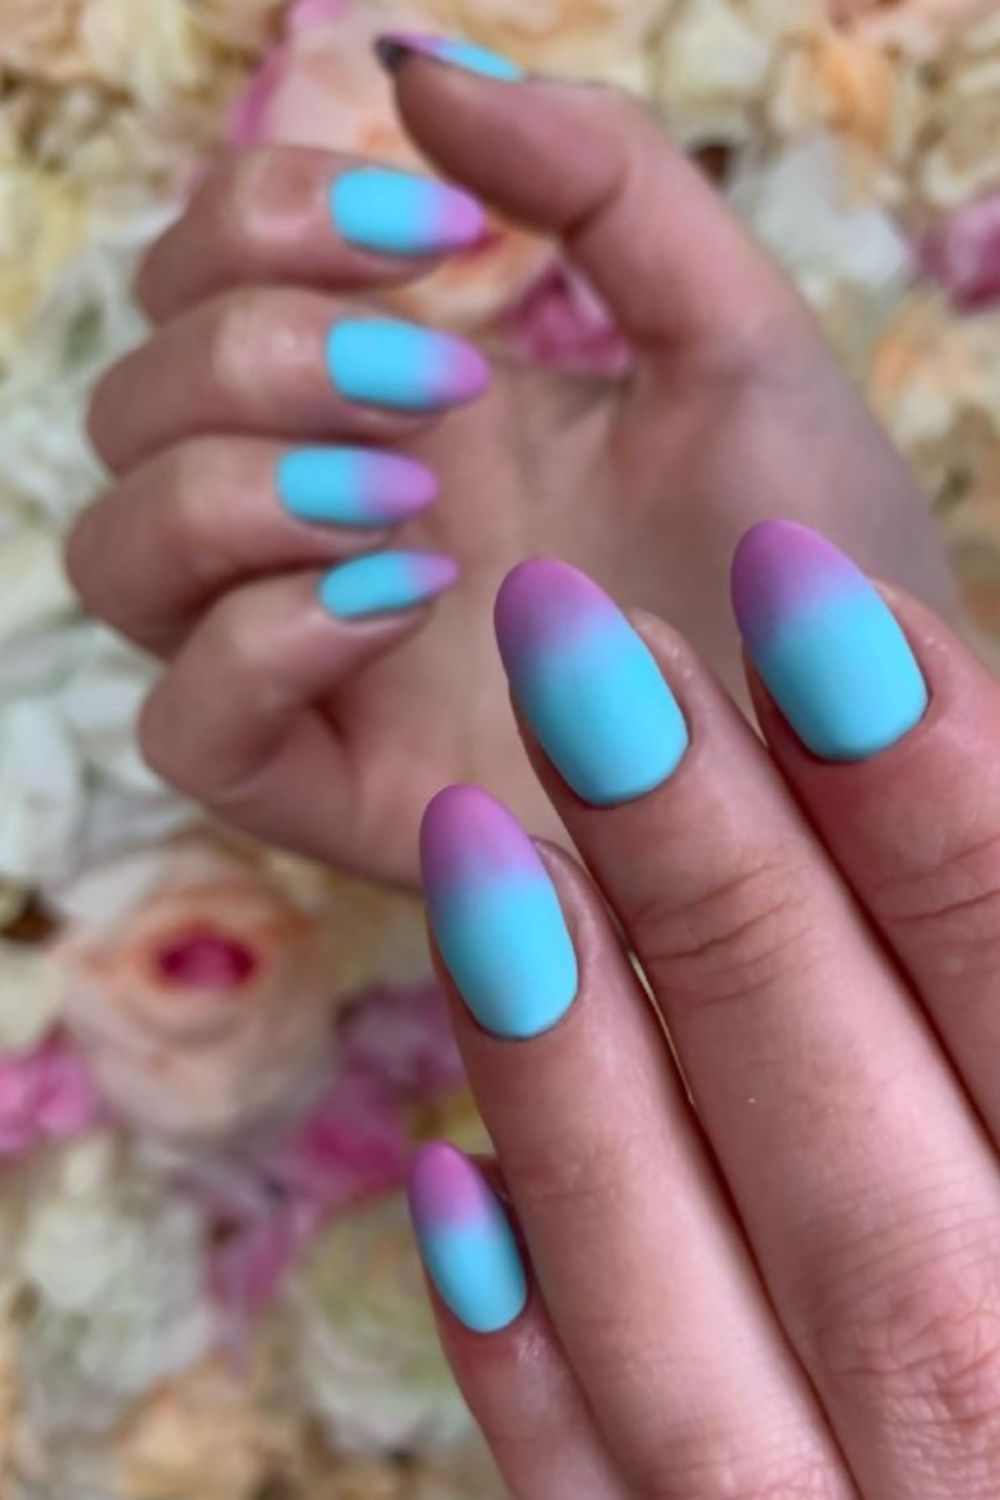 Pink ombre nails | the Millennial Version of a French Manicure